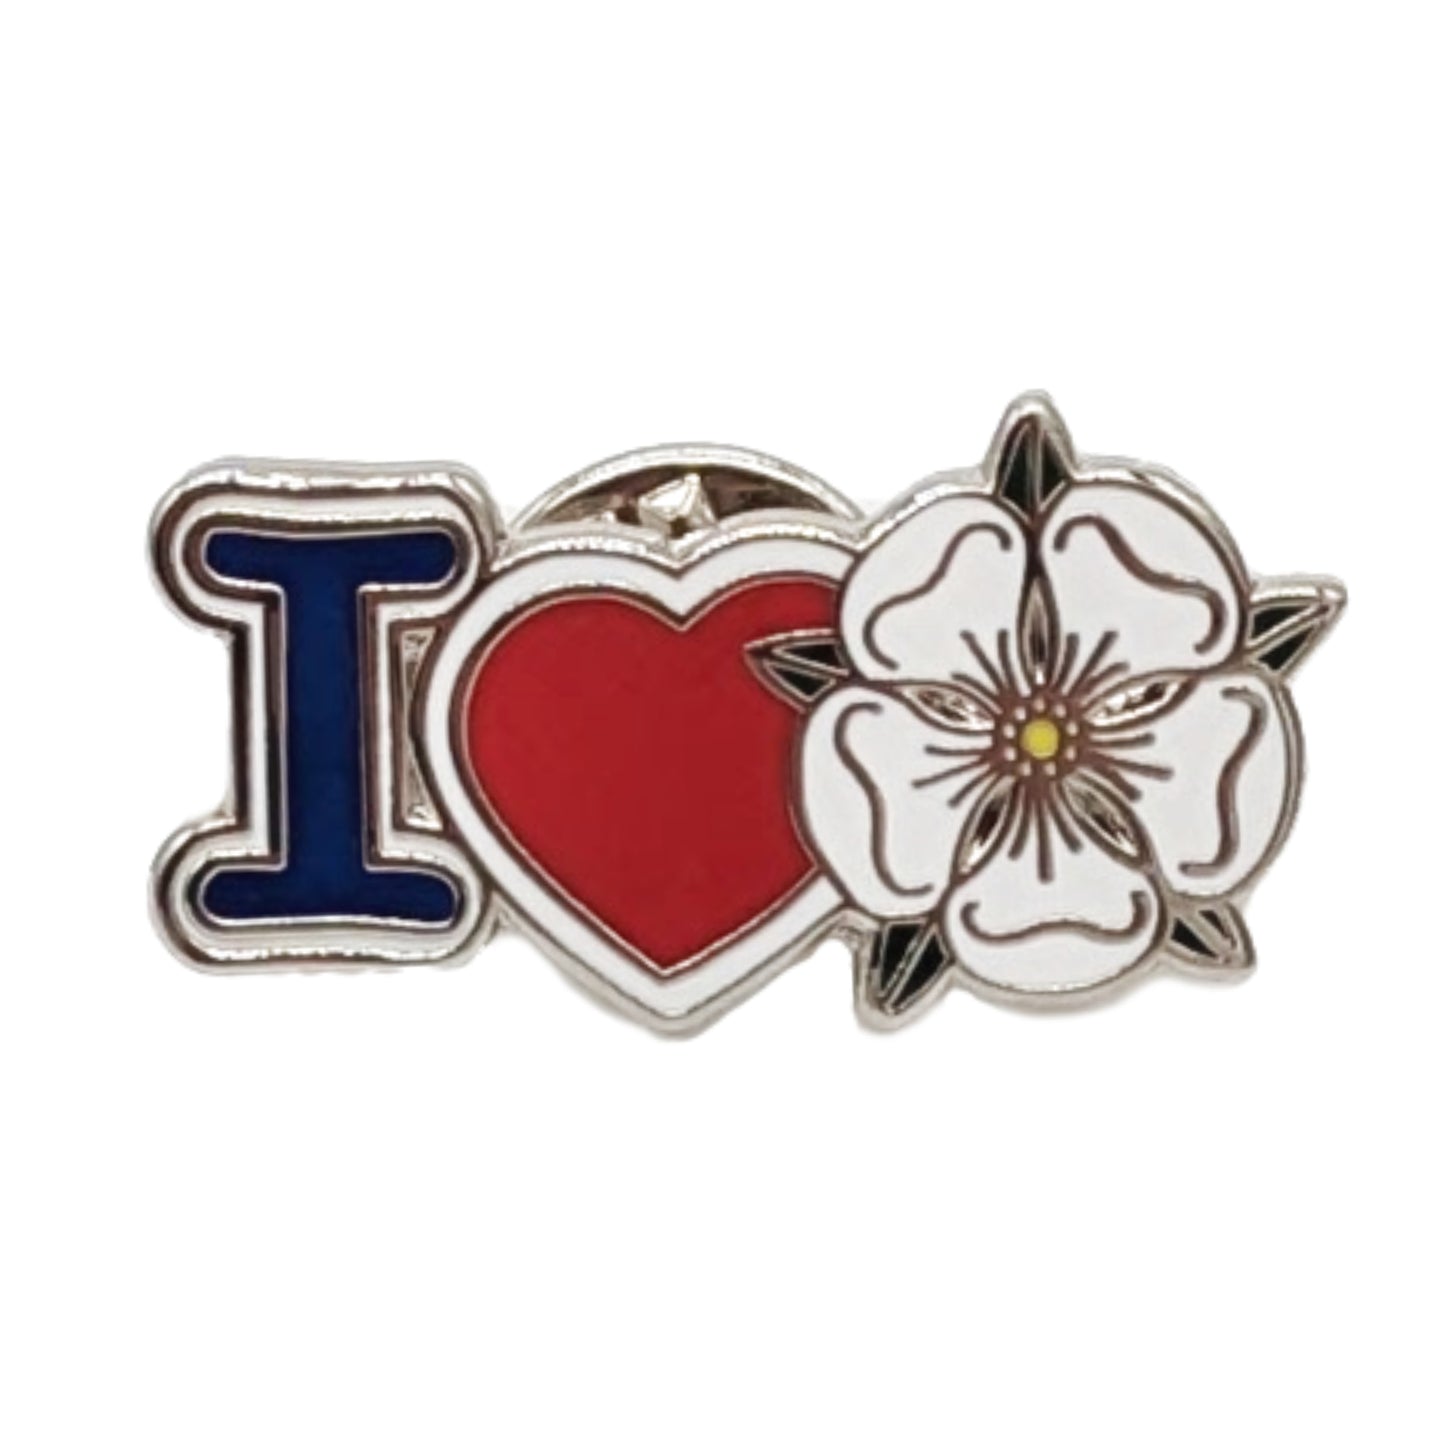 I Love Yorkshire White Rose Pin Badge - The Great Yorkshire Shop